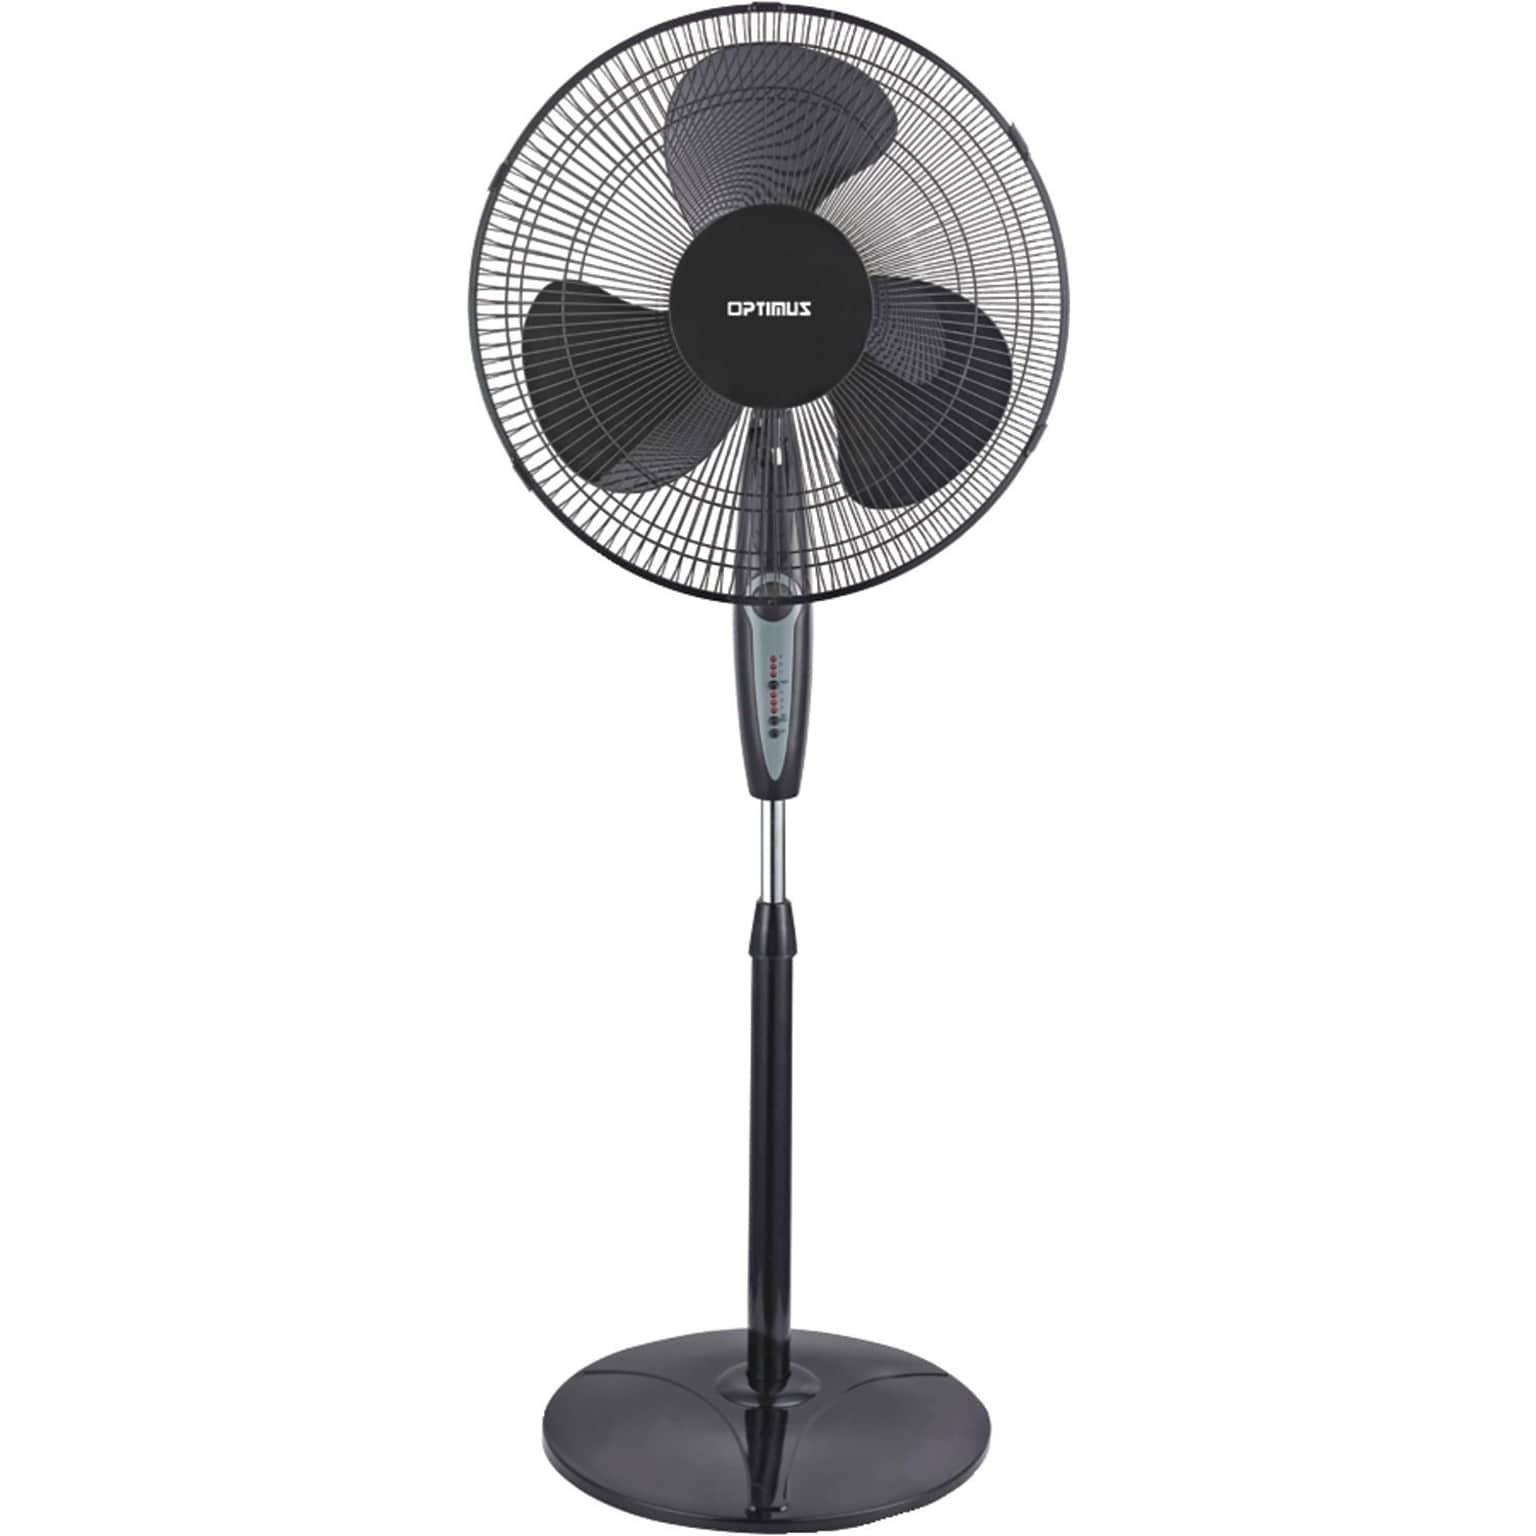 Optimus Oscillating F-1672BK Stand 3 Speed Fan with Remote, Black (OPSF1672BK)